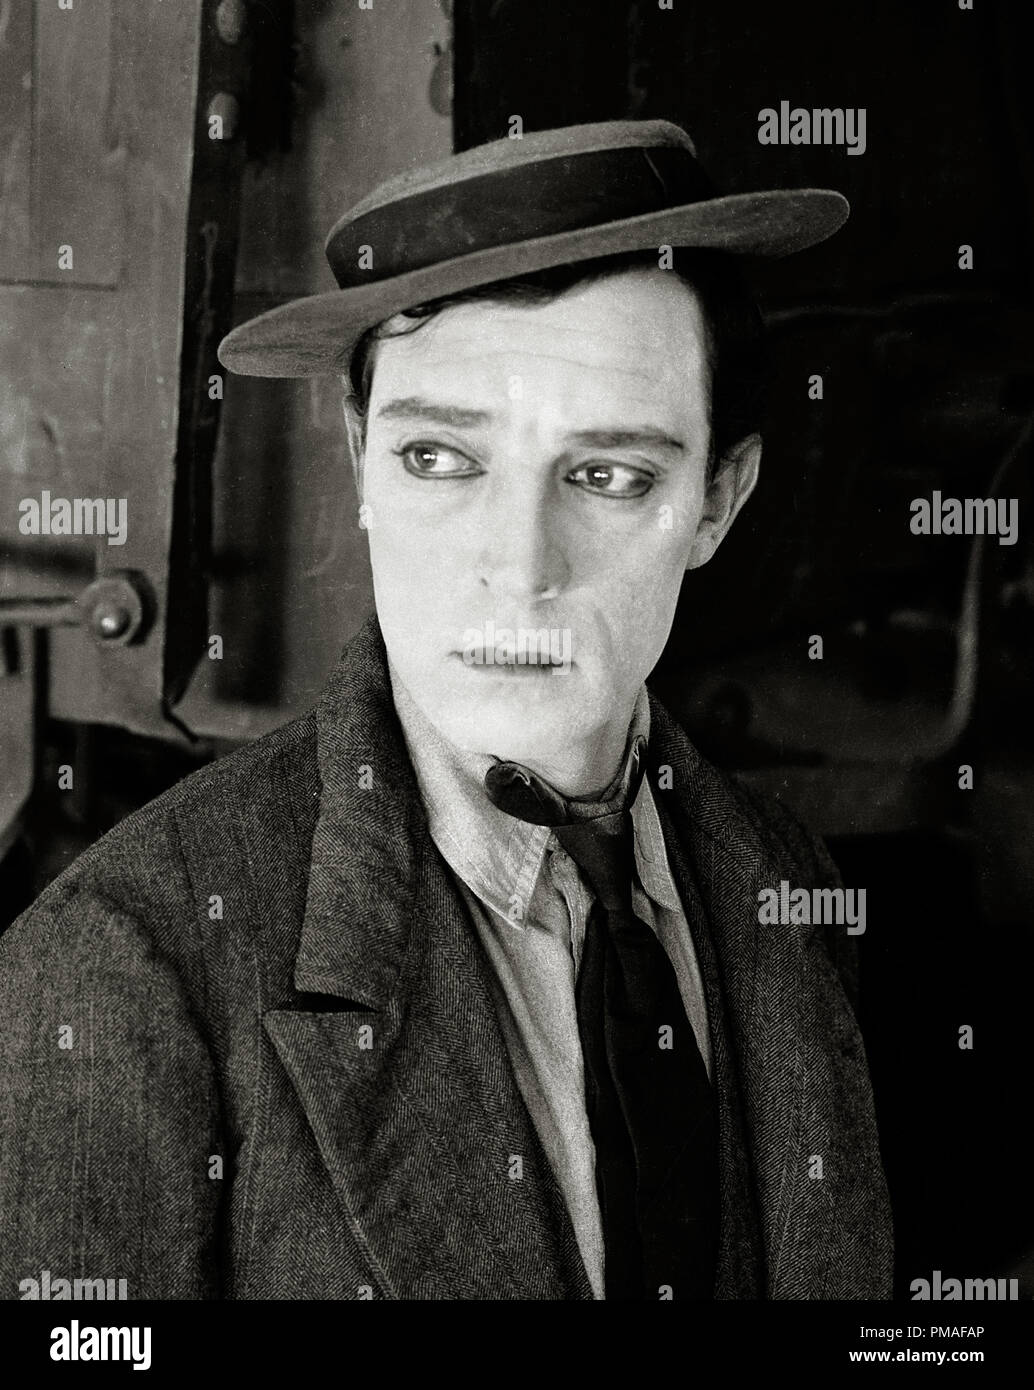 Buster Keaton Silent Film Star Actor Master of Comedy Mime Sad Expression  Photograph 1925